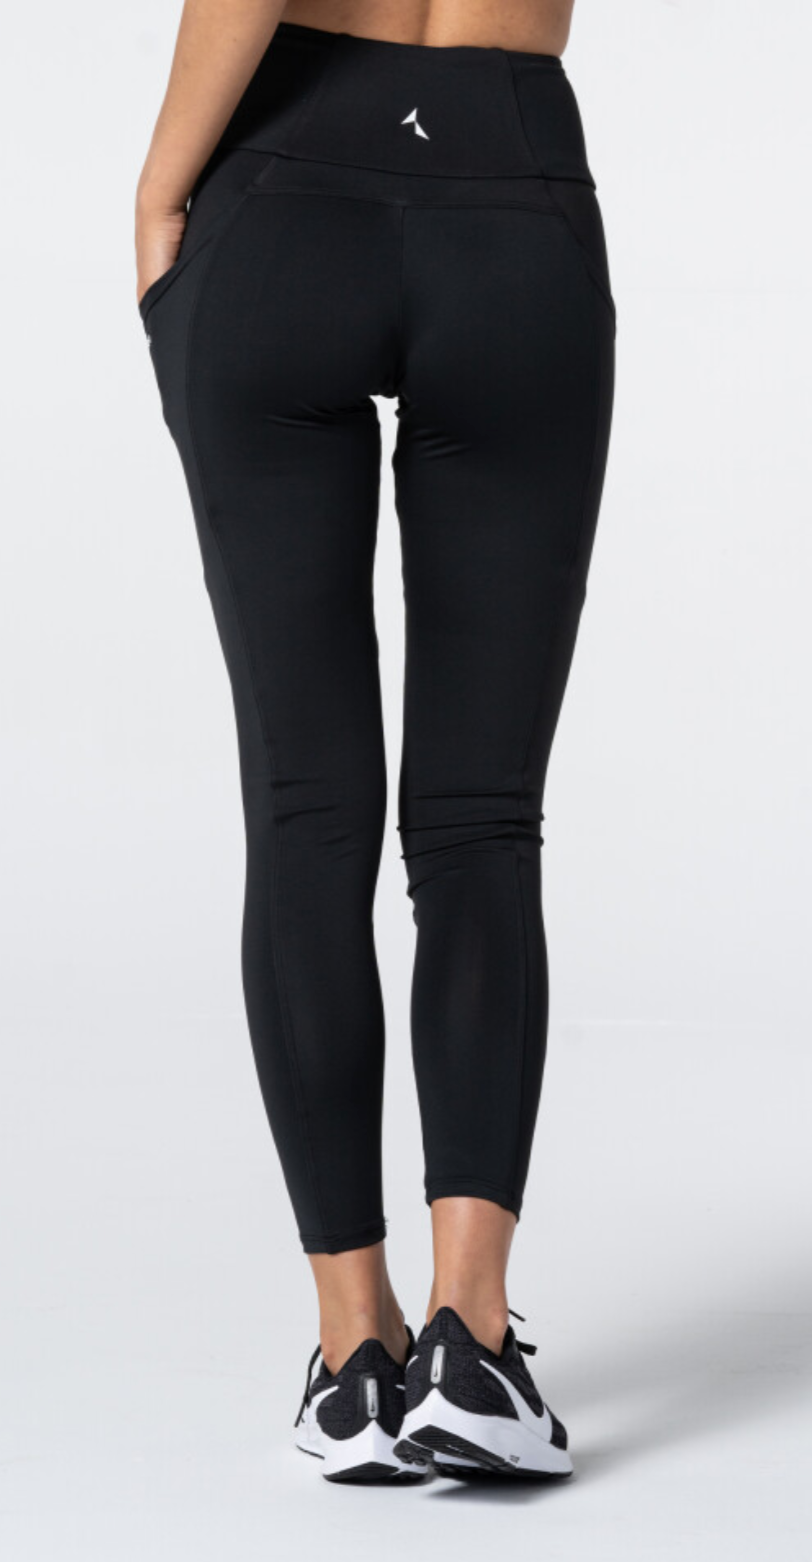 Carpatree Libra Pocket Leggings - High waisted sports leggings with 3 pockets, 2 side pockets and a hidden pocket in the waistband.